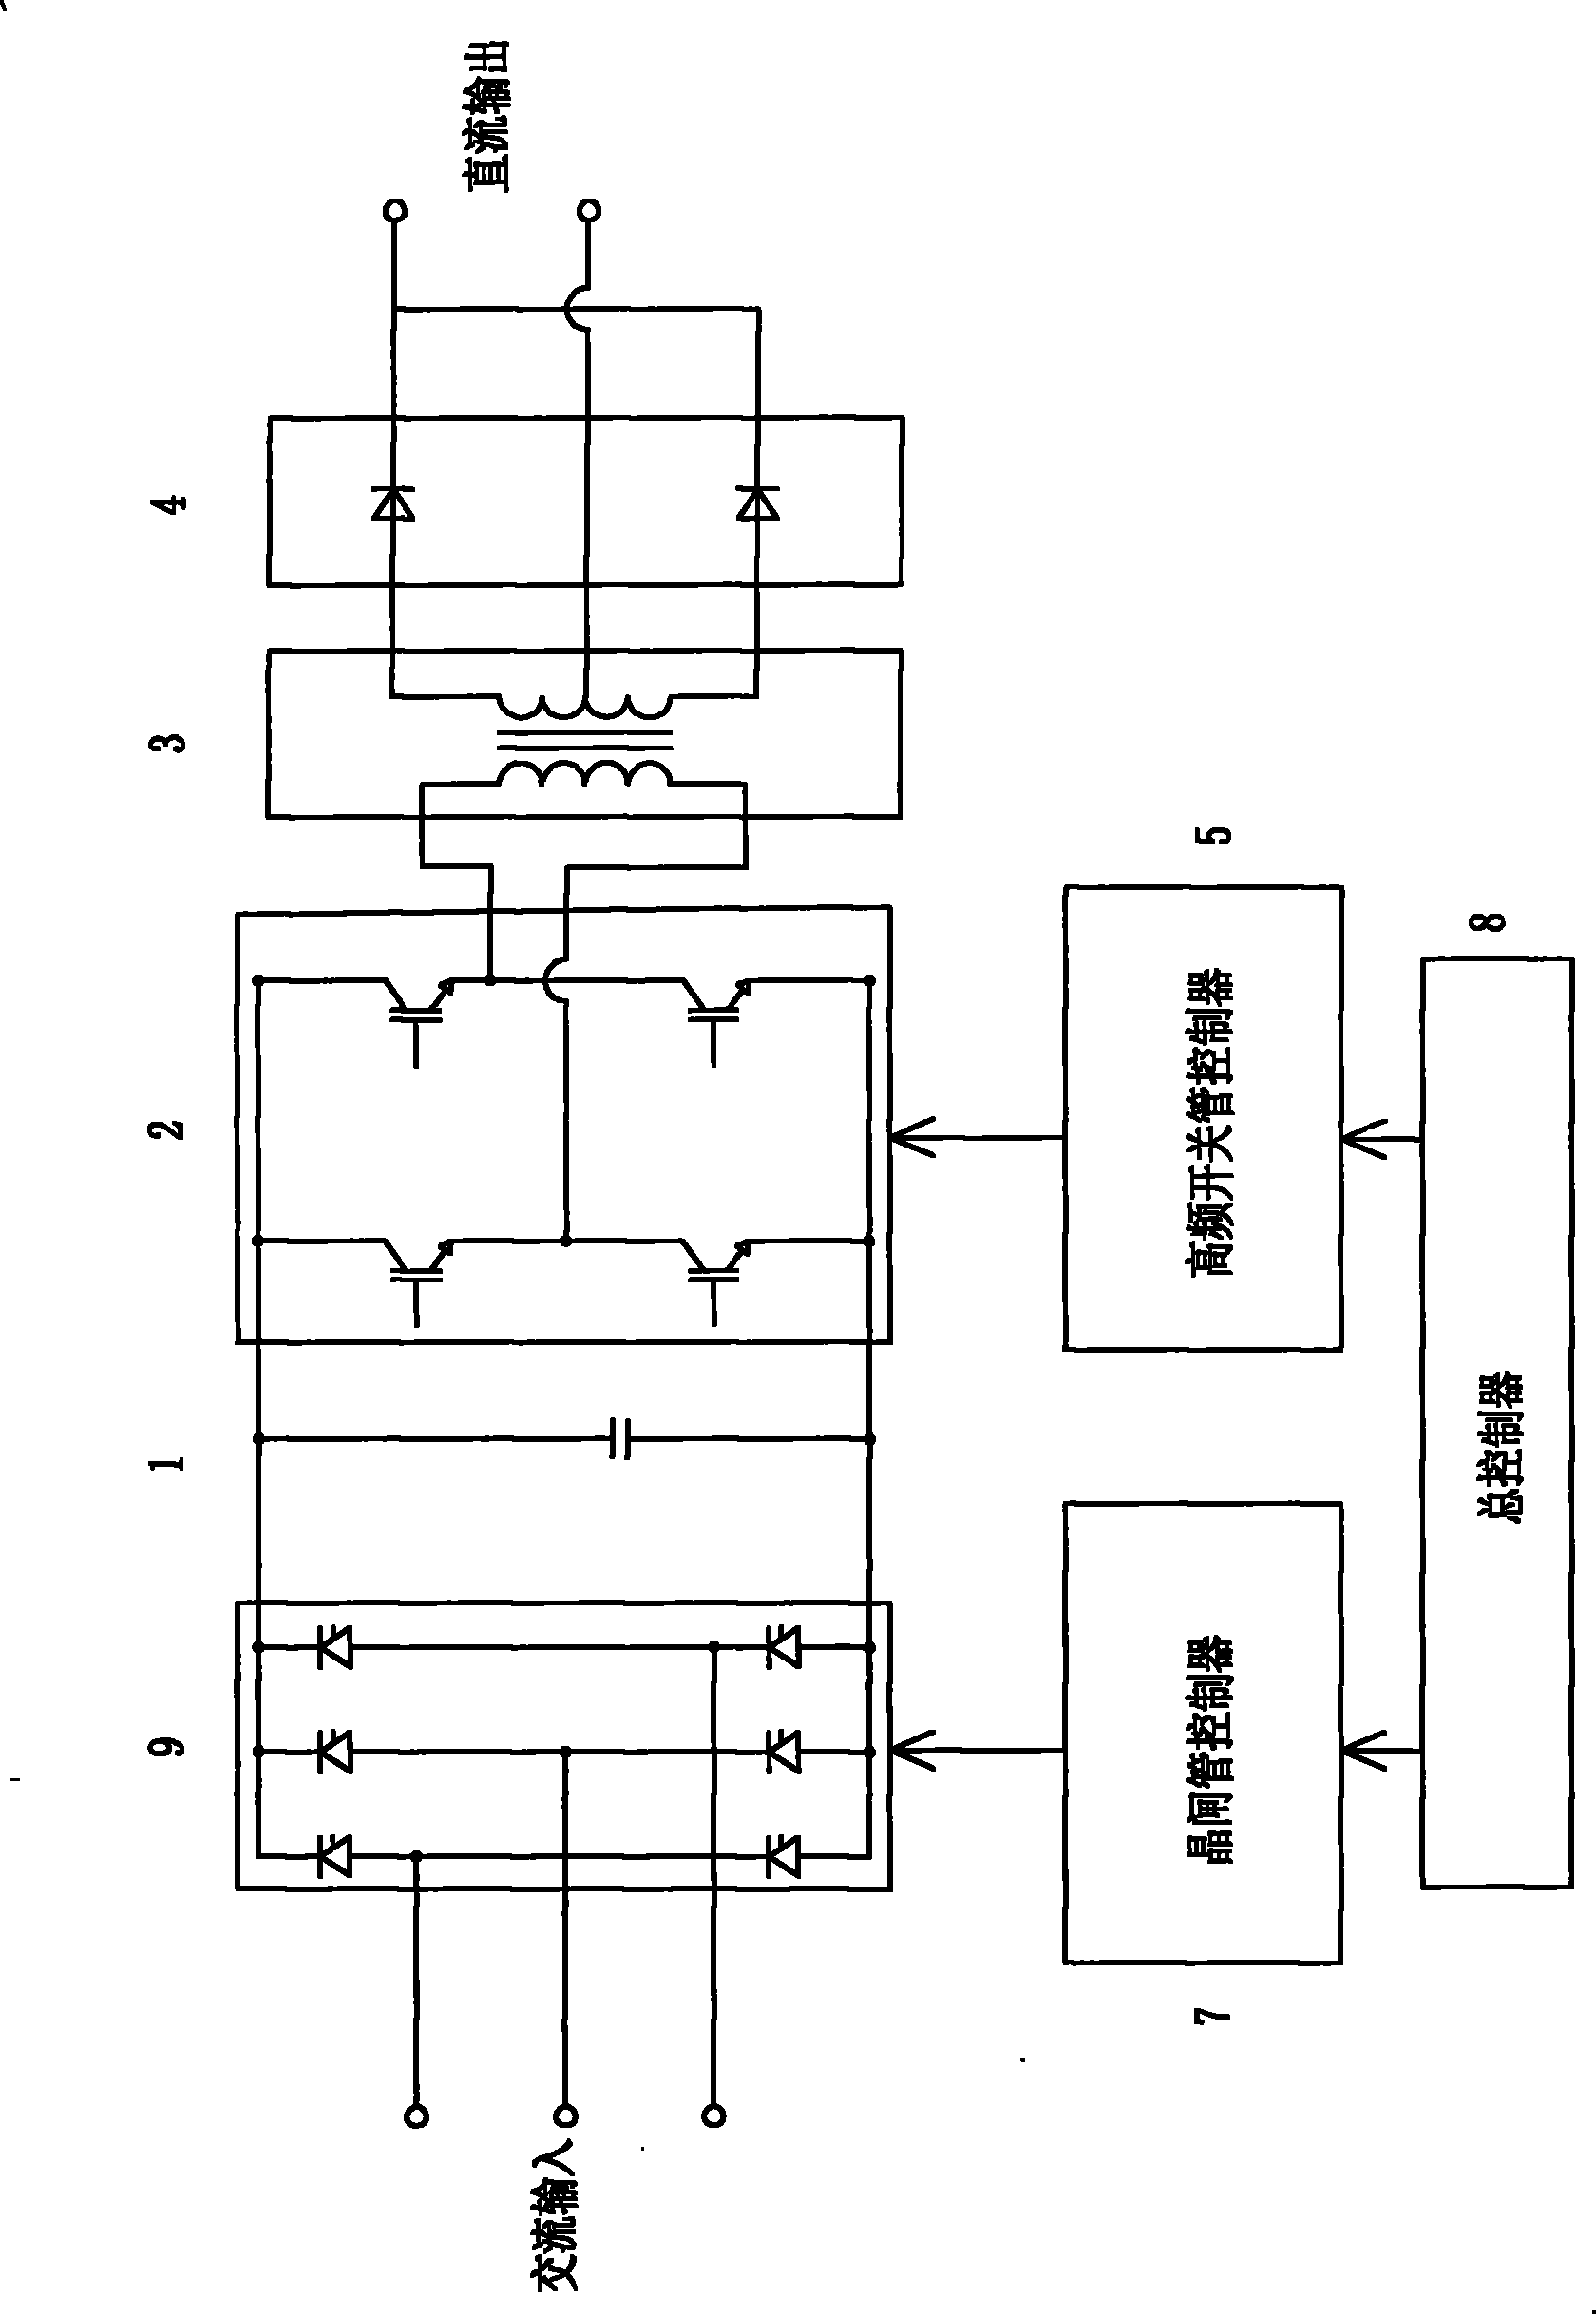 High-frequency switch rectifying power supply with wide-range direct current voltage output characteristic